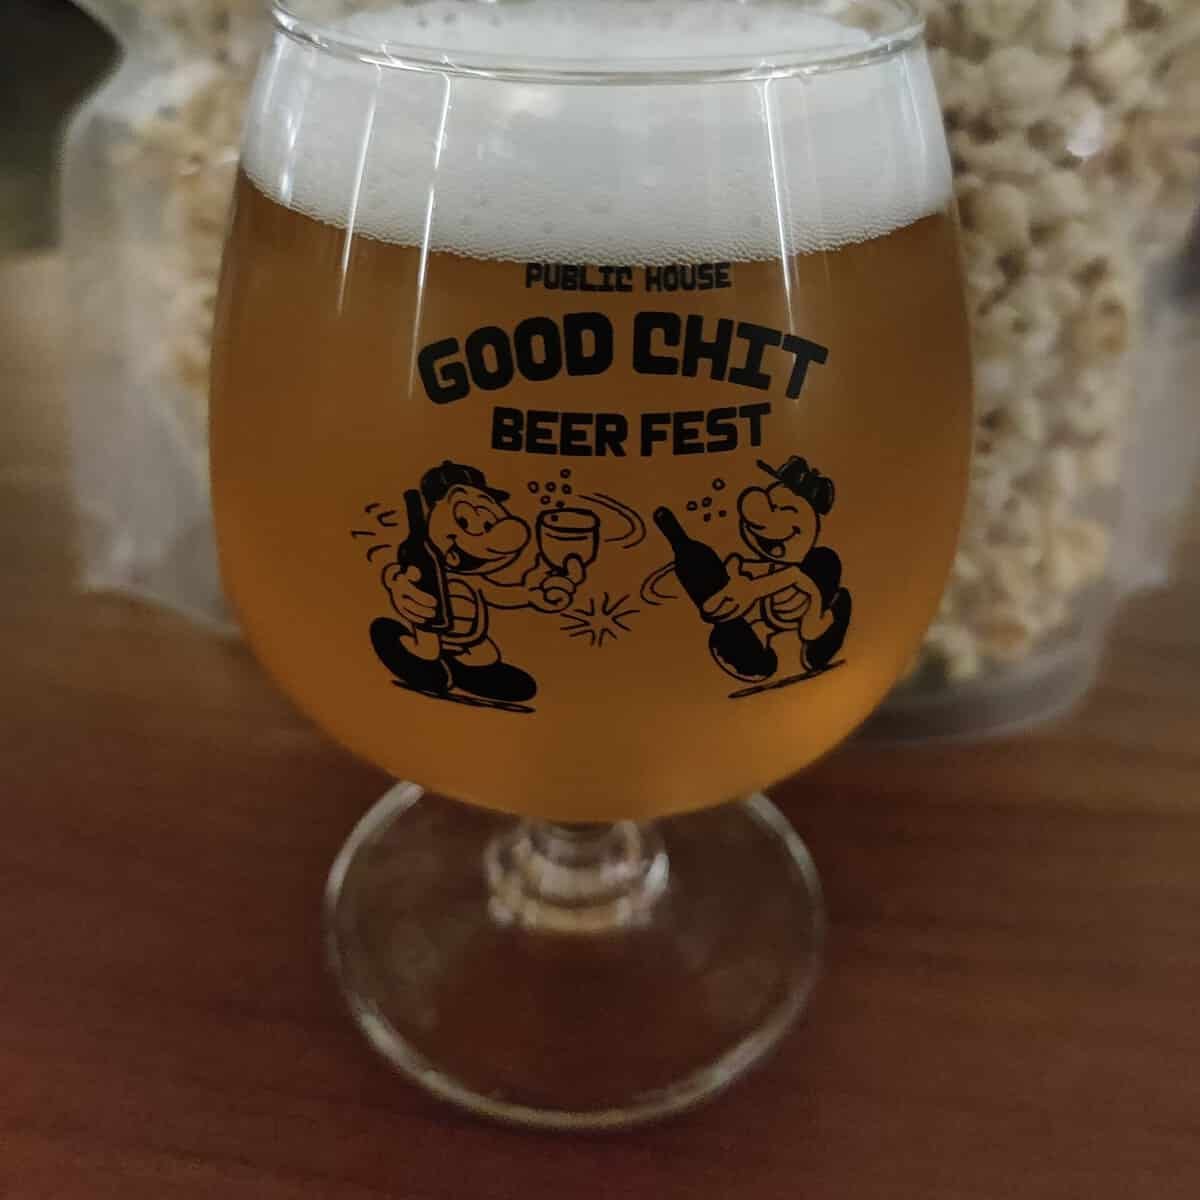 Craft beer in the limited release glass at Good Chit Beer Fest at Public House in Bangkok